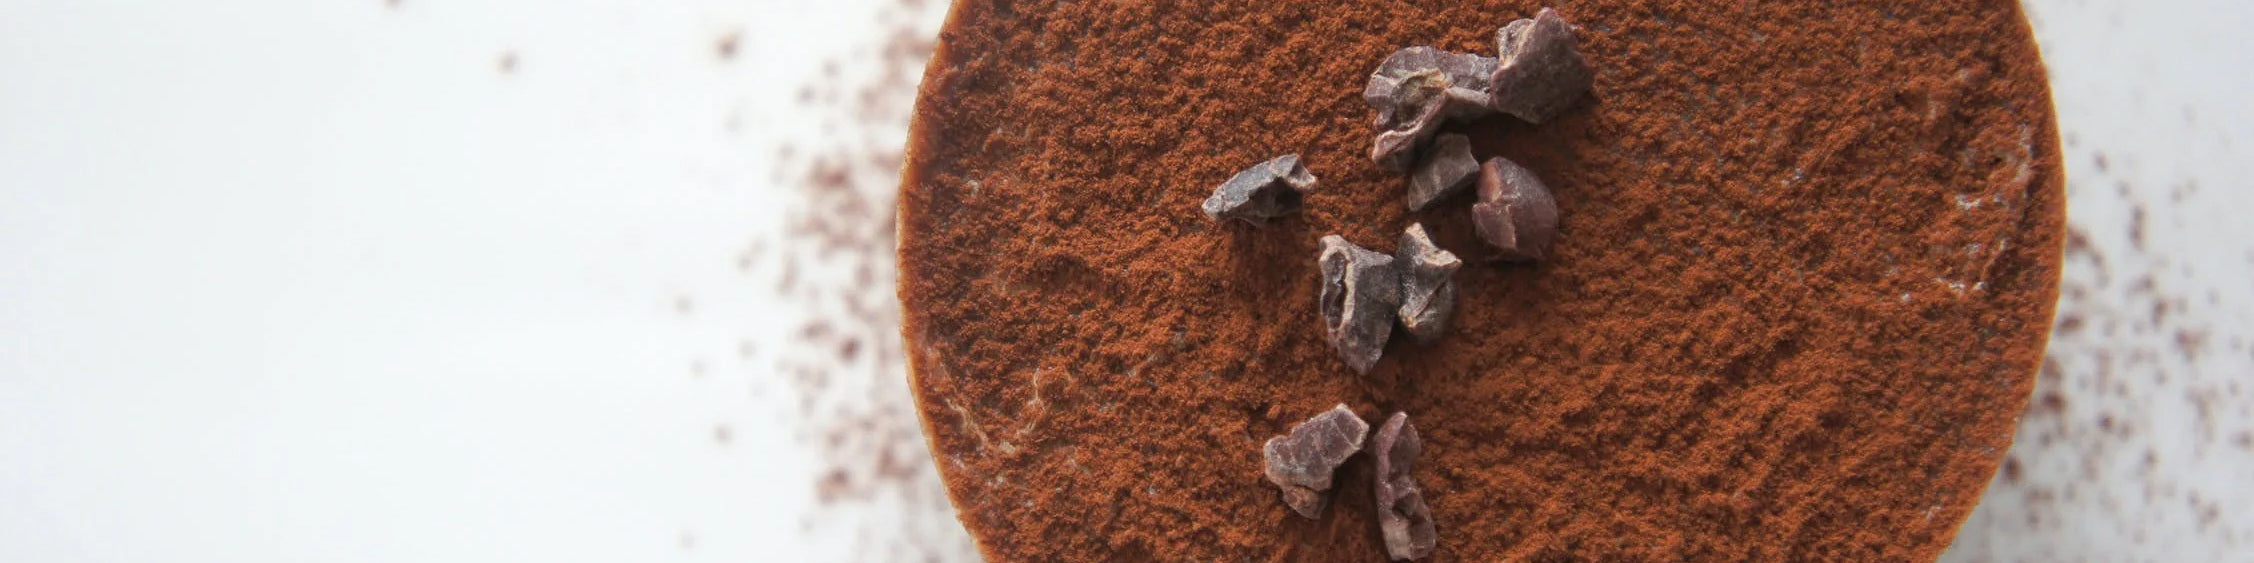 Cacao - a superfood?